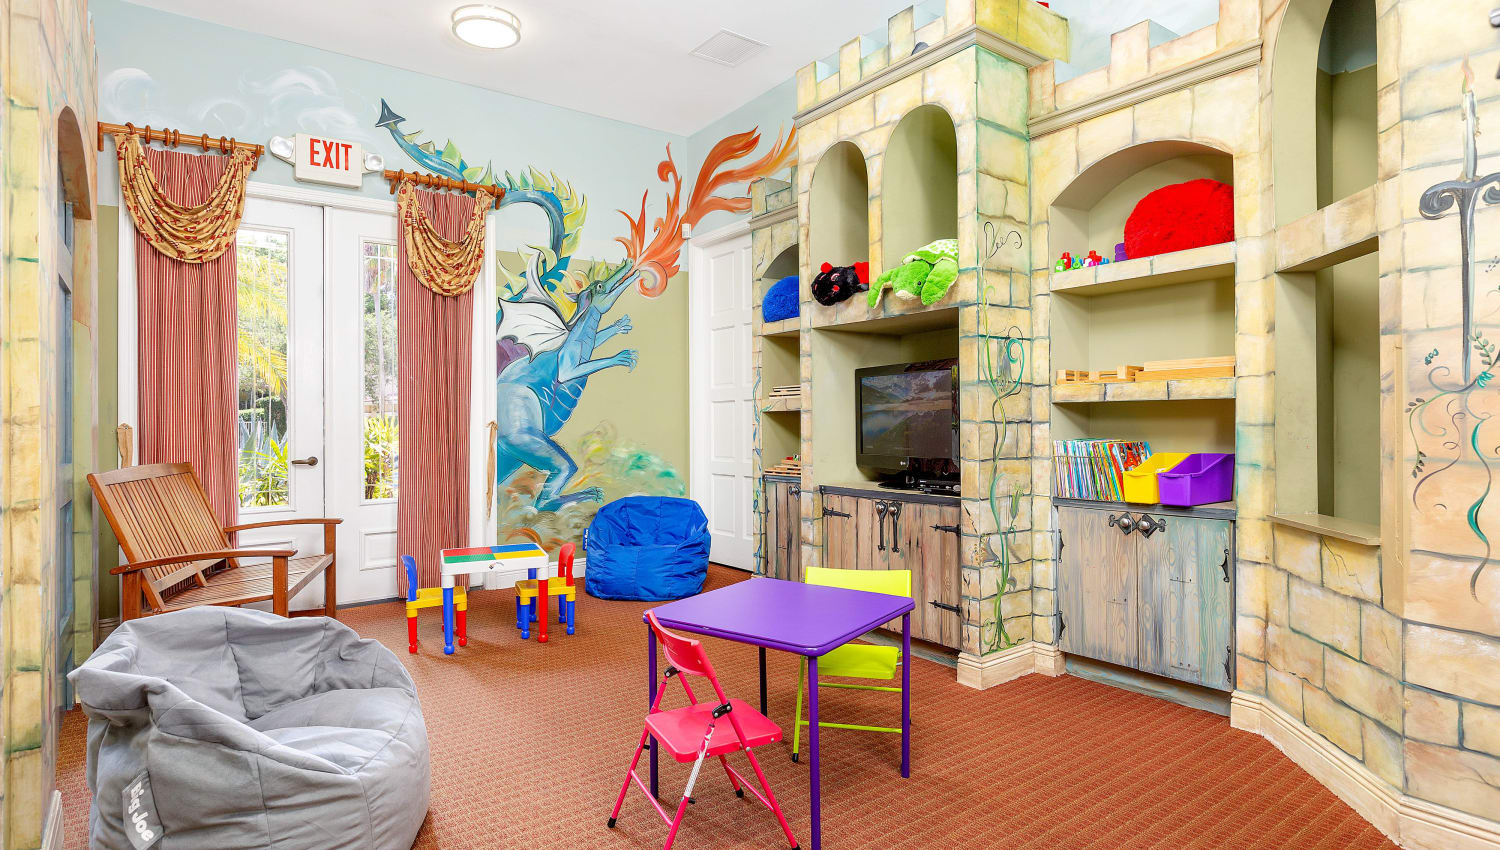 Playroom at Ibis Reserve Apartments in West Palm Beach, Florida